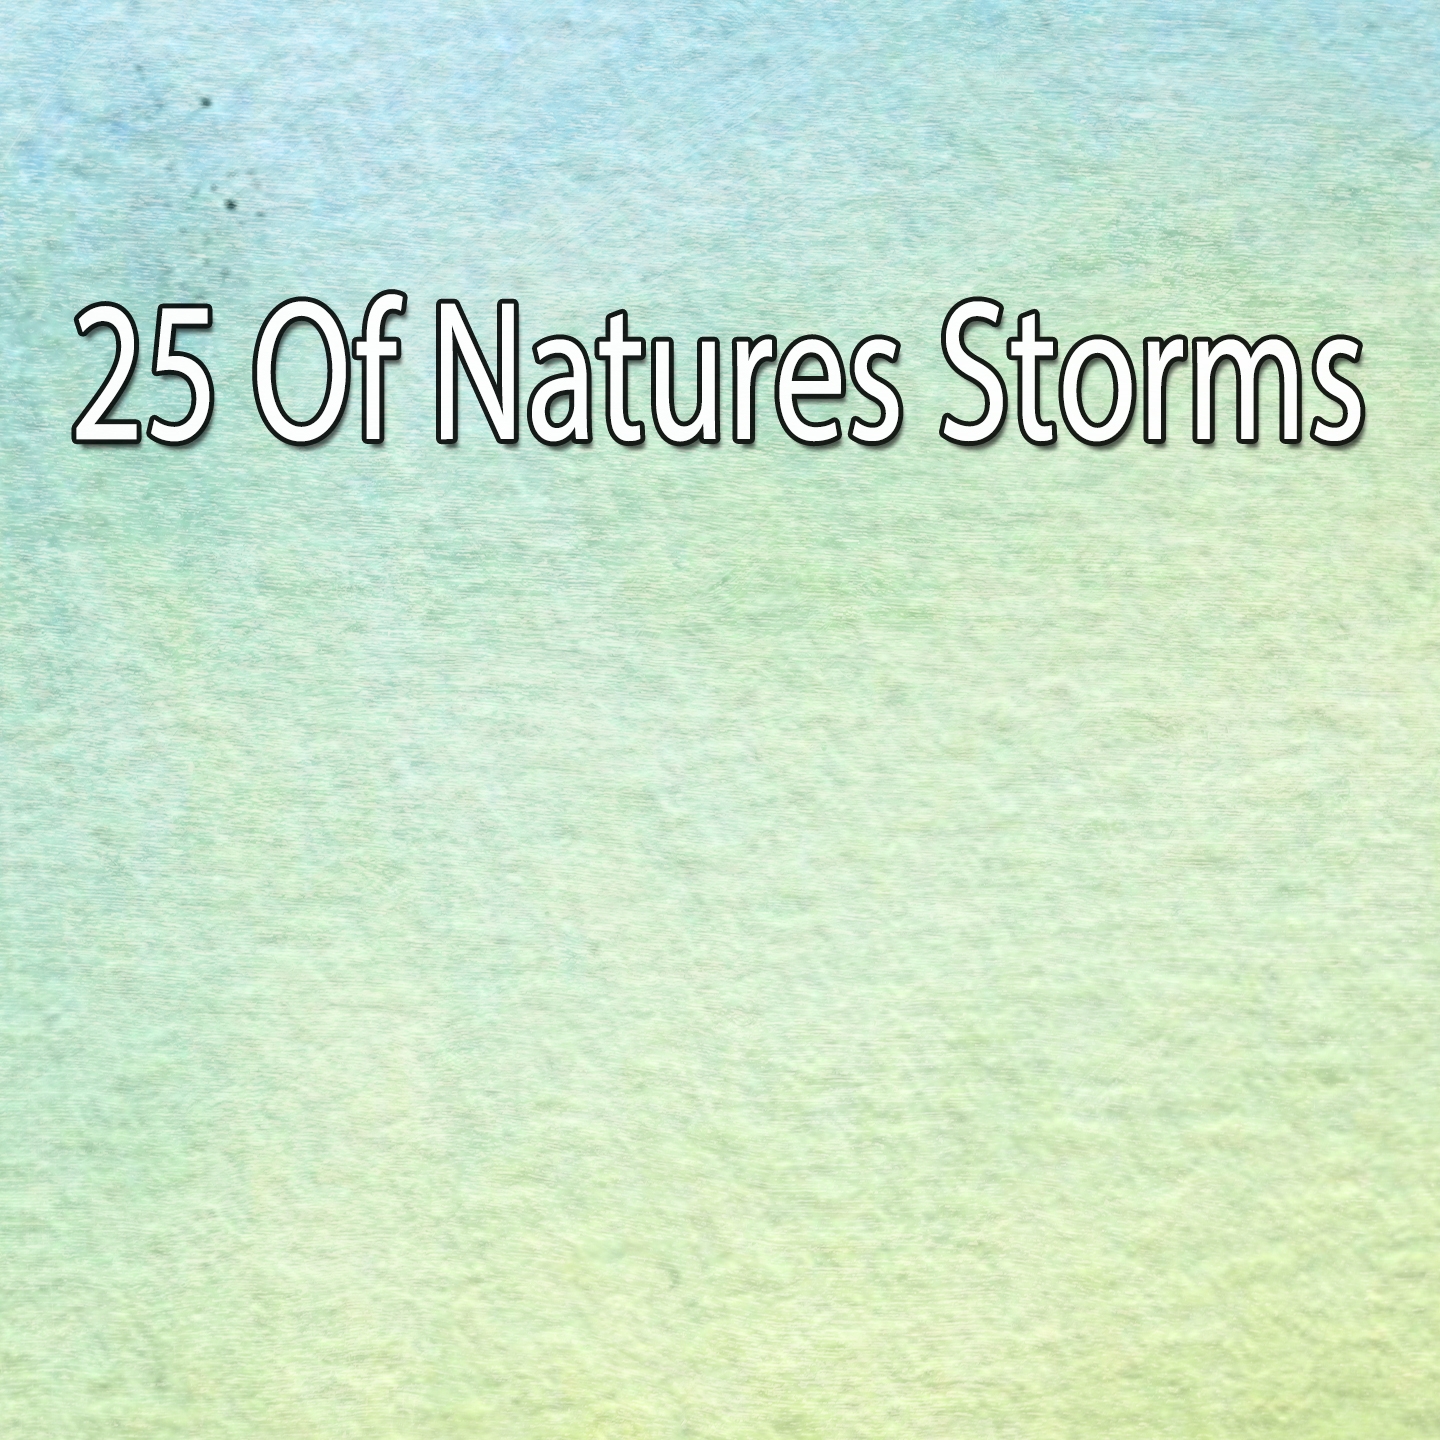 25 Of Natures Storms